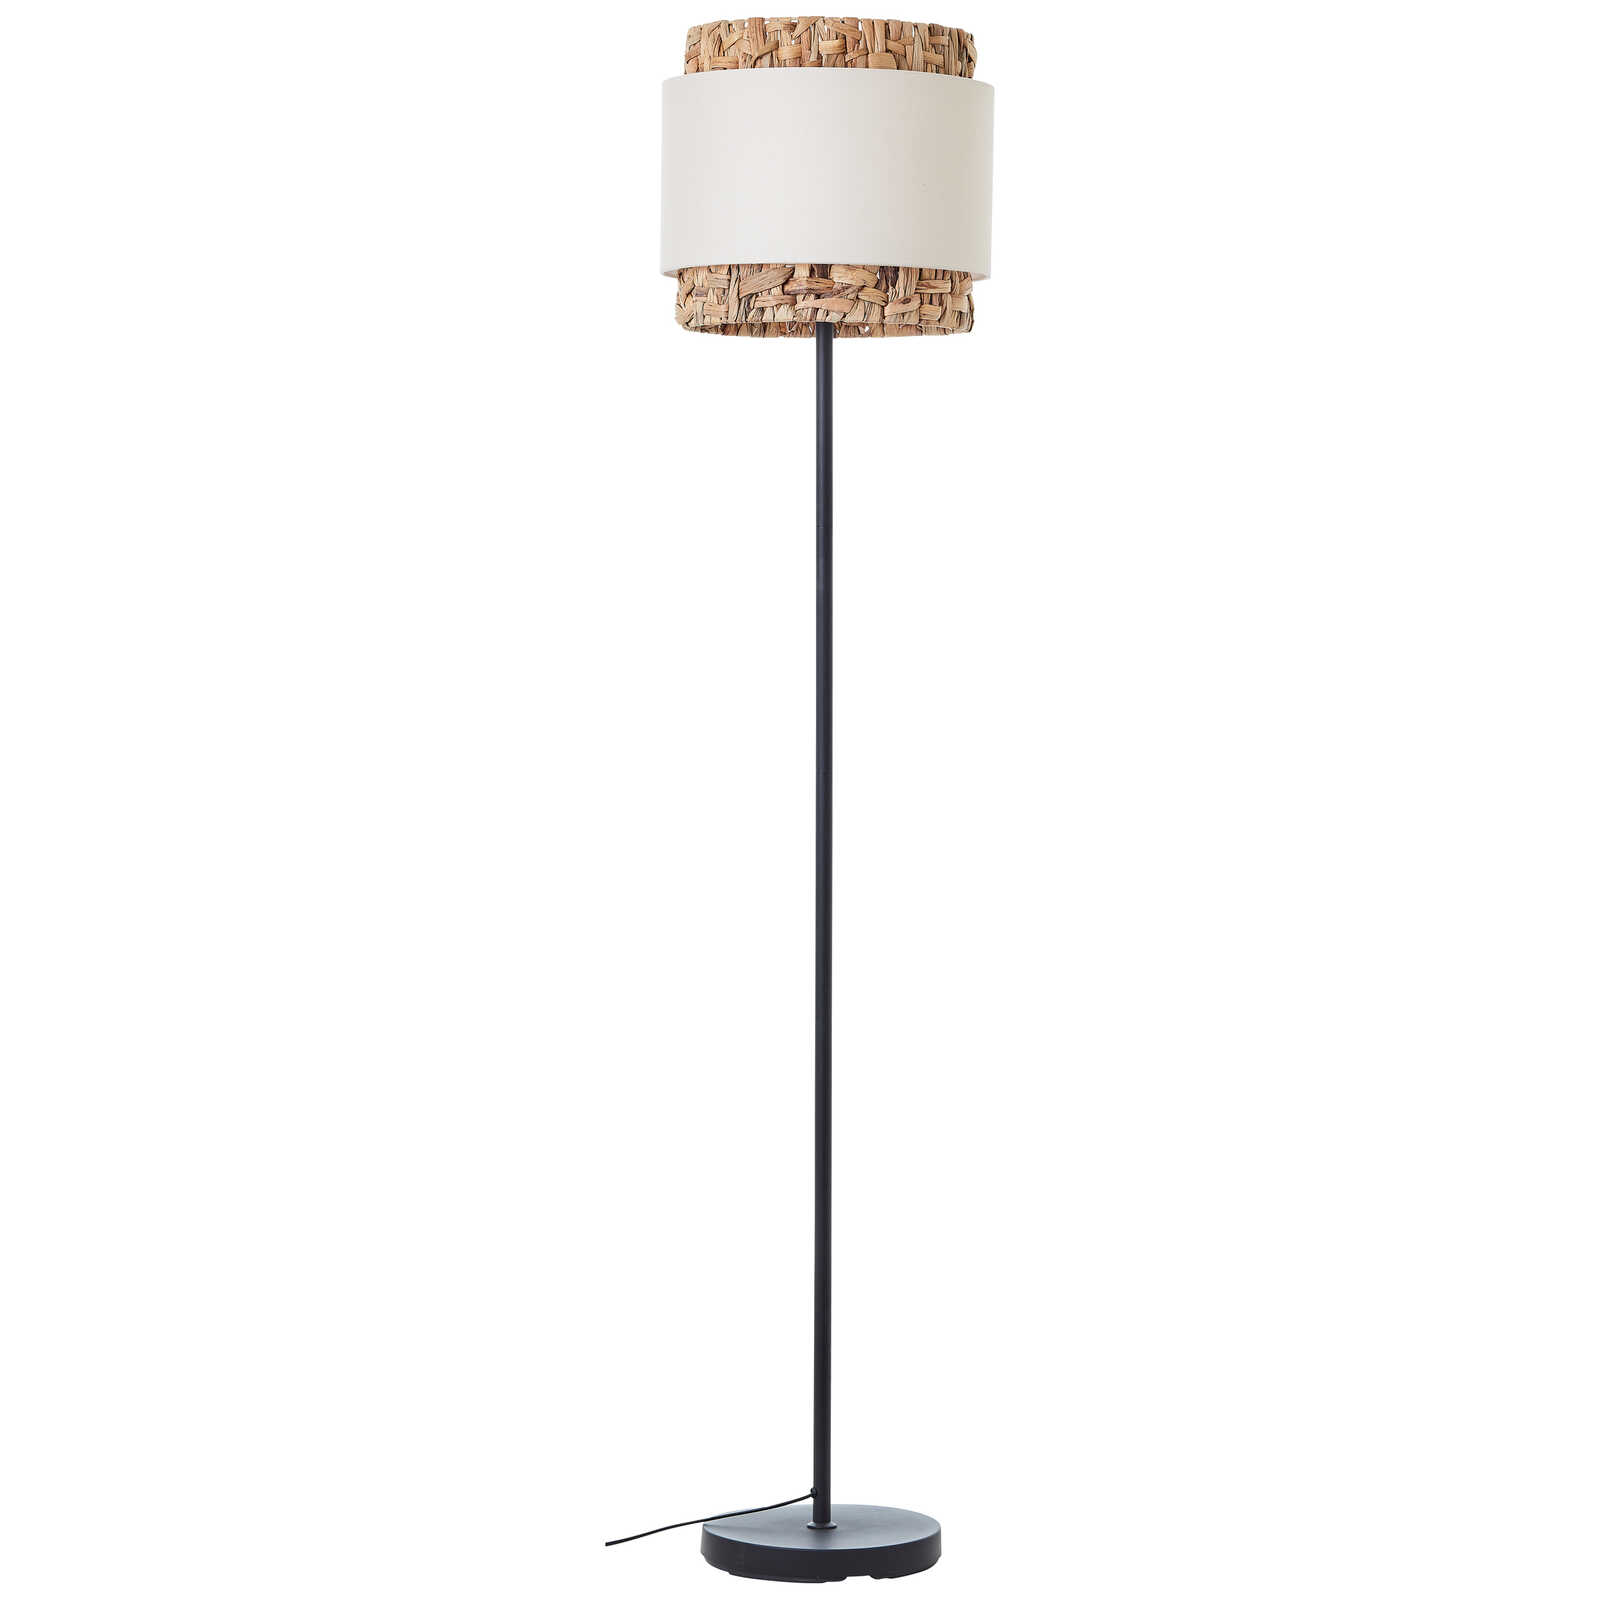             Floor lamp made of textile - Till 7 - Brown
        